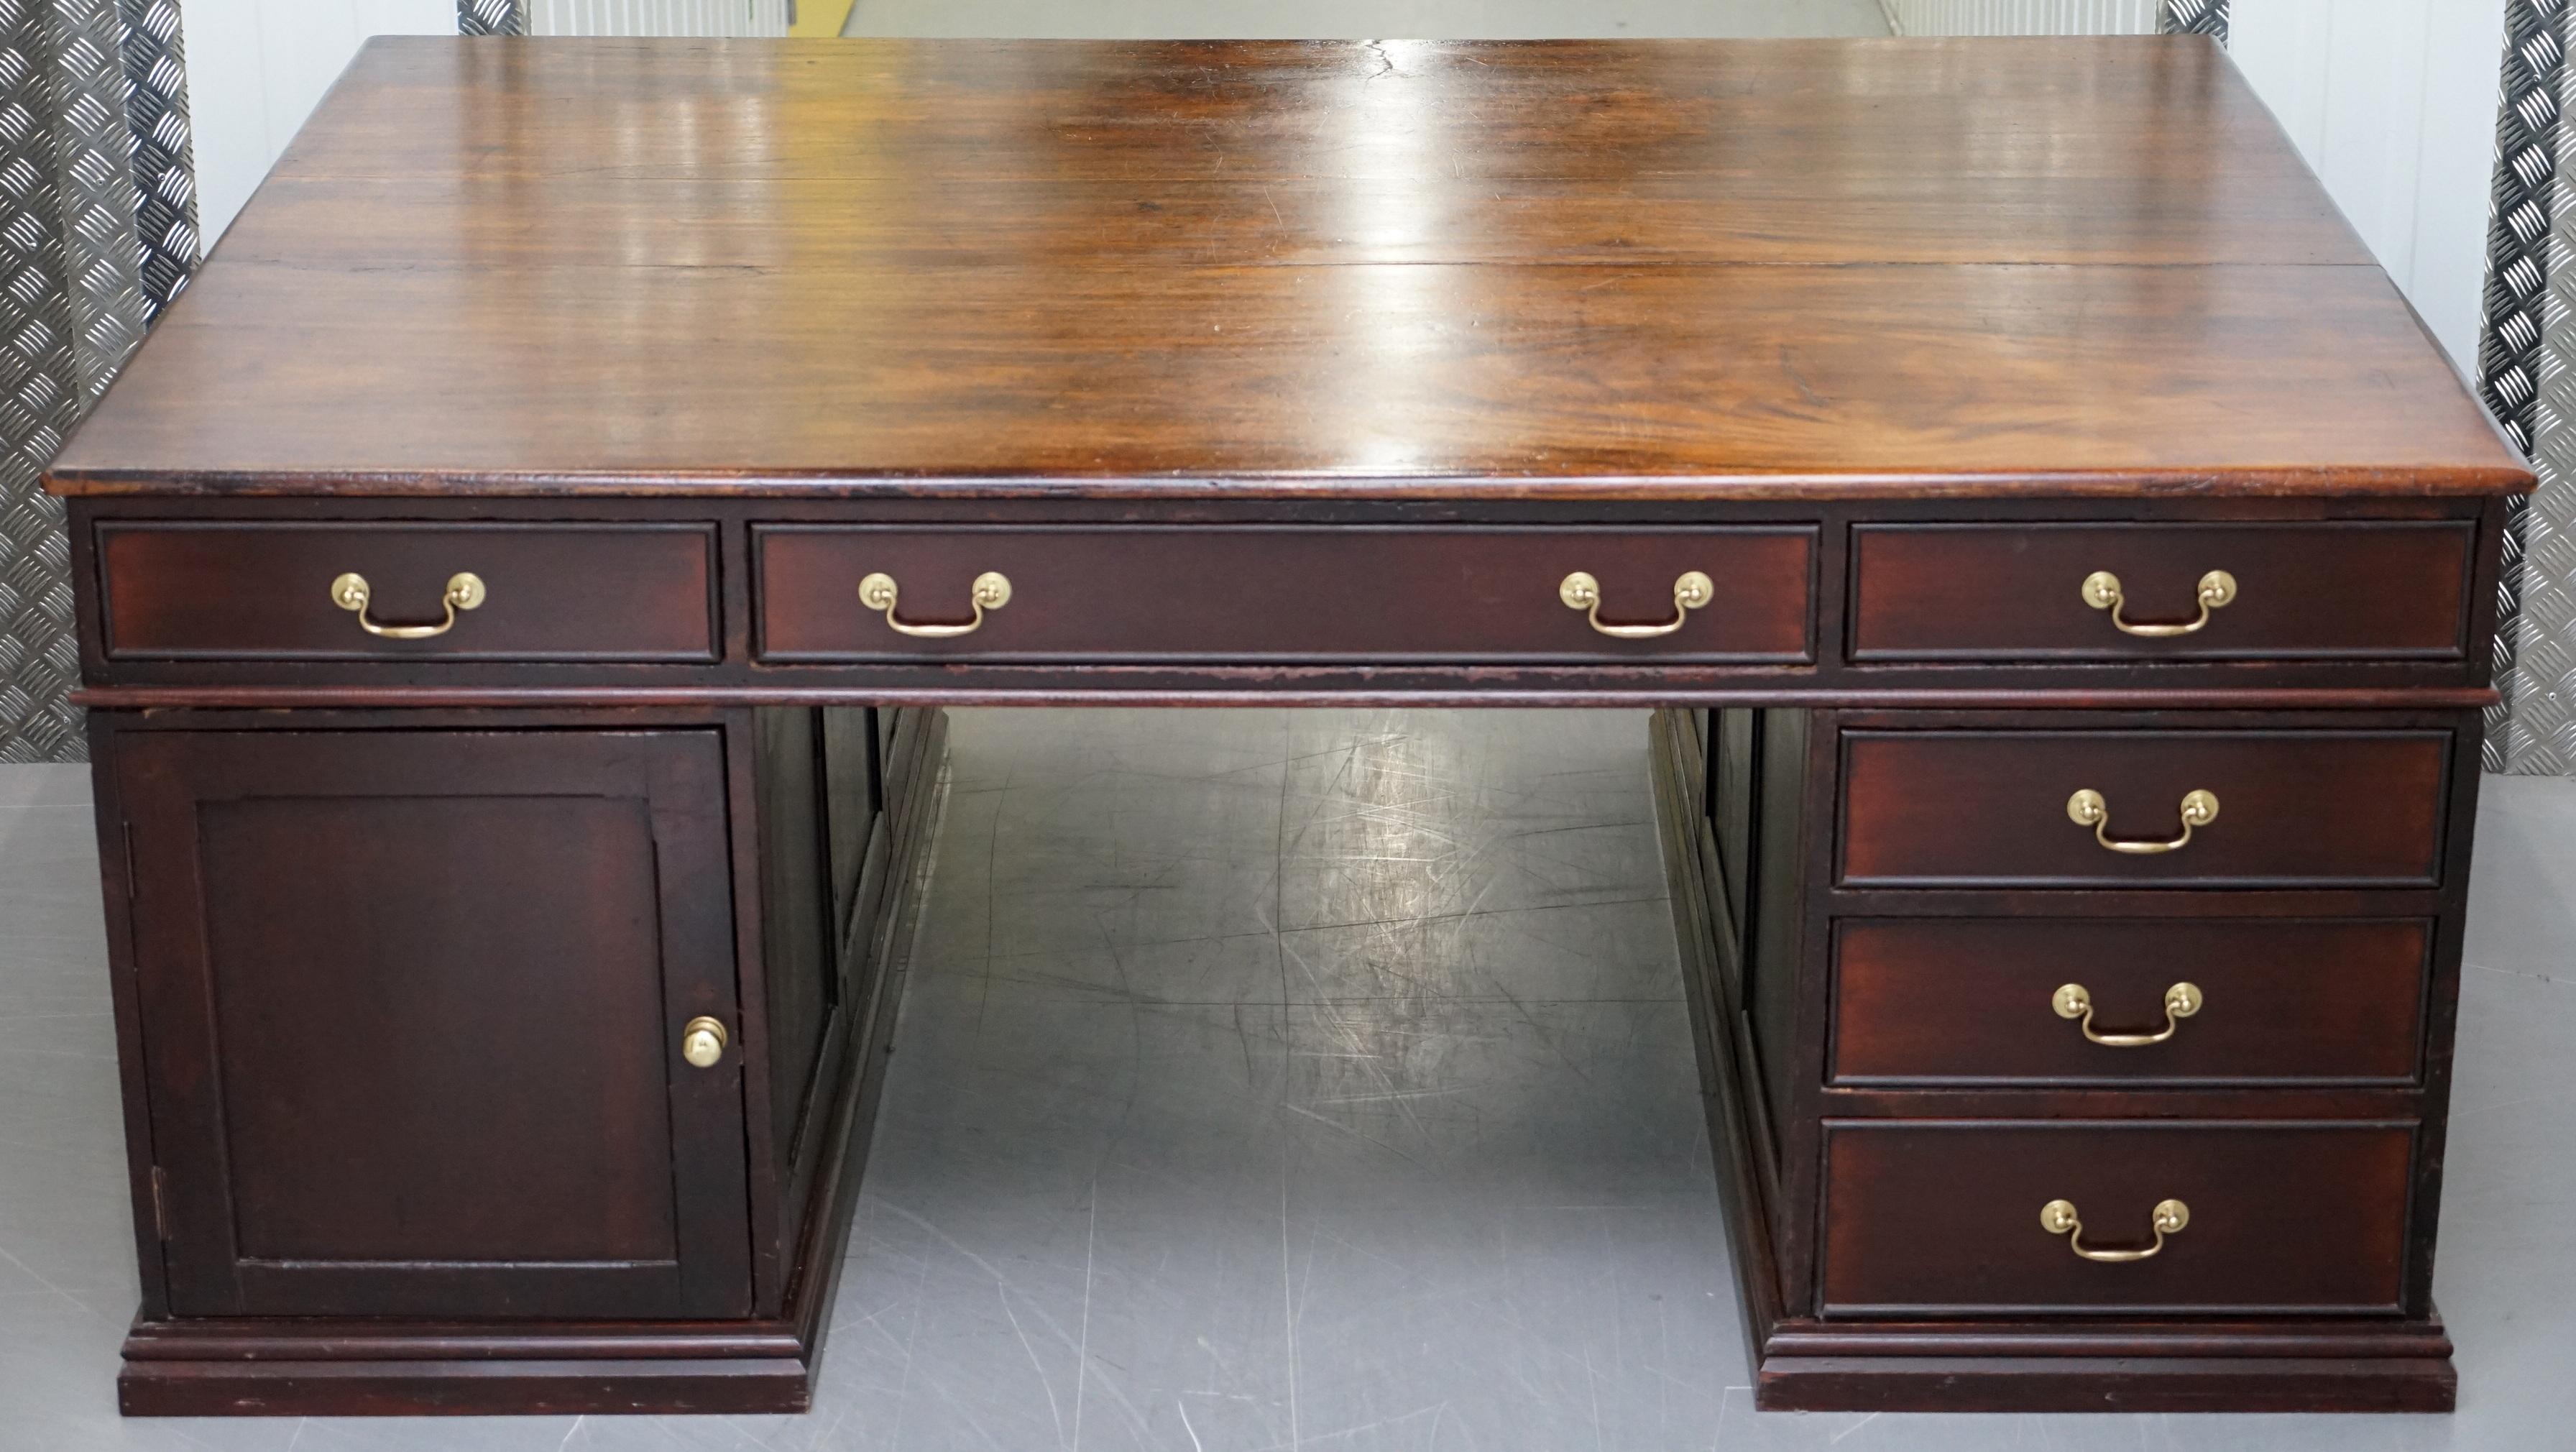 We are delighted to offer for sale this absolutely monumentally large Victorian twin pedestal 9 drawers 2 cupboards double sided mahogany partner desk.

This desk is massive, originally designed as you can see for two people to share, the depth of